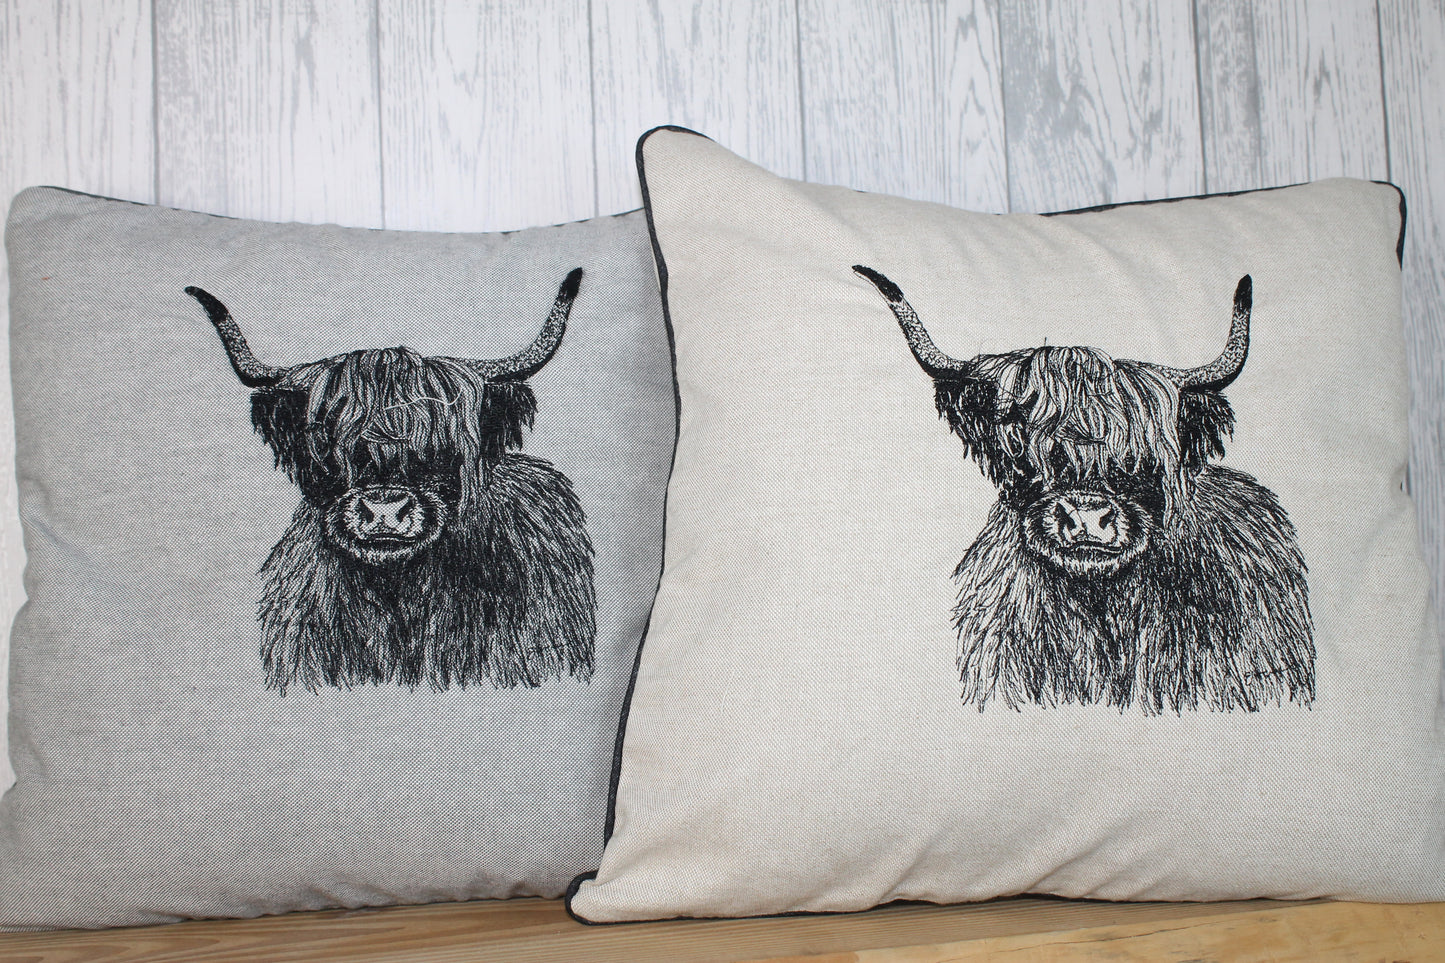 Highland Cow Cushion, Grey Piped Embroidered Cushion - Lizzie Dixon Designs